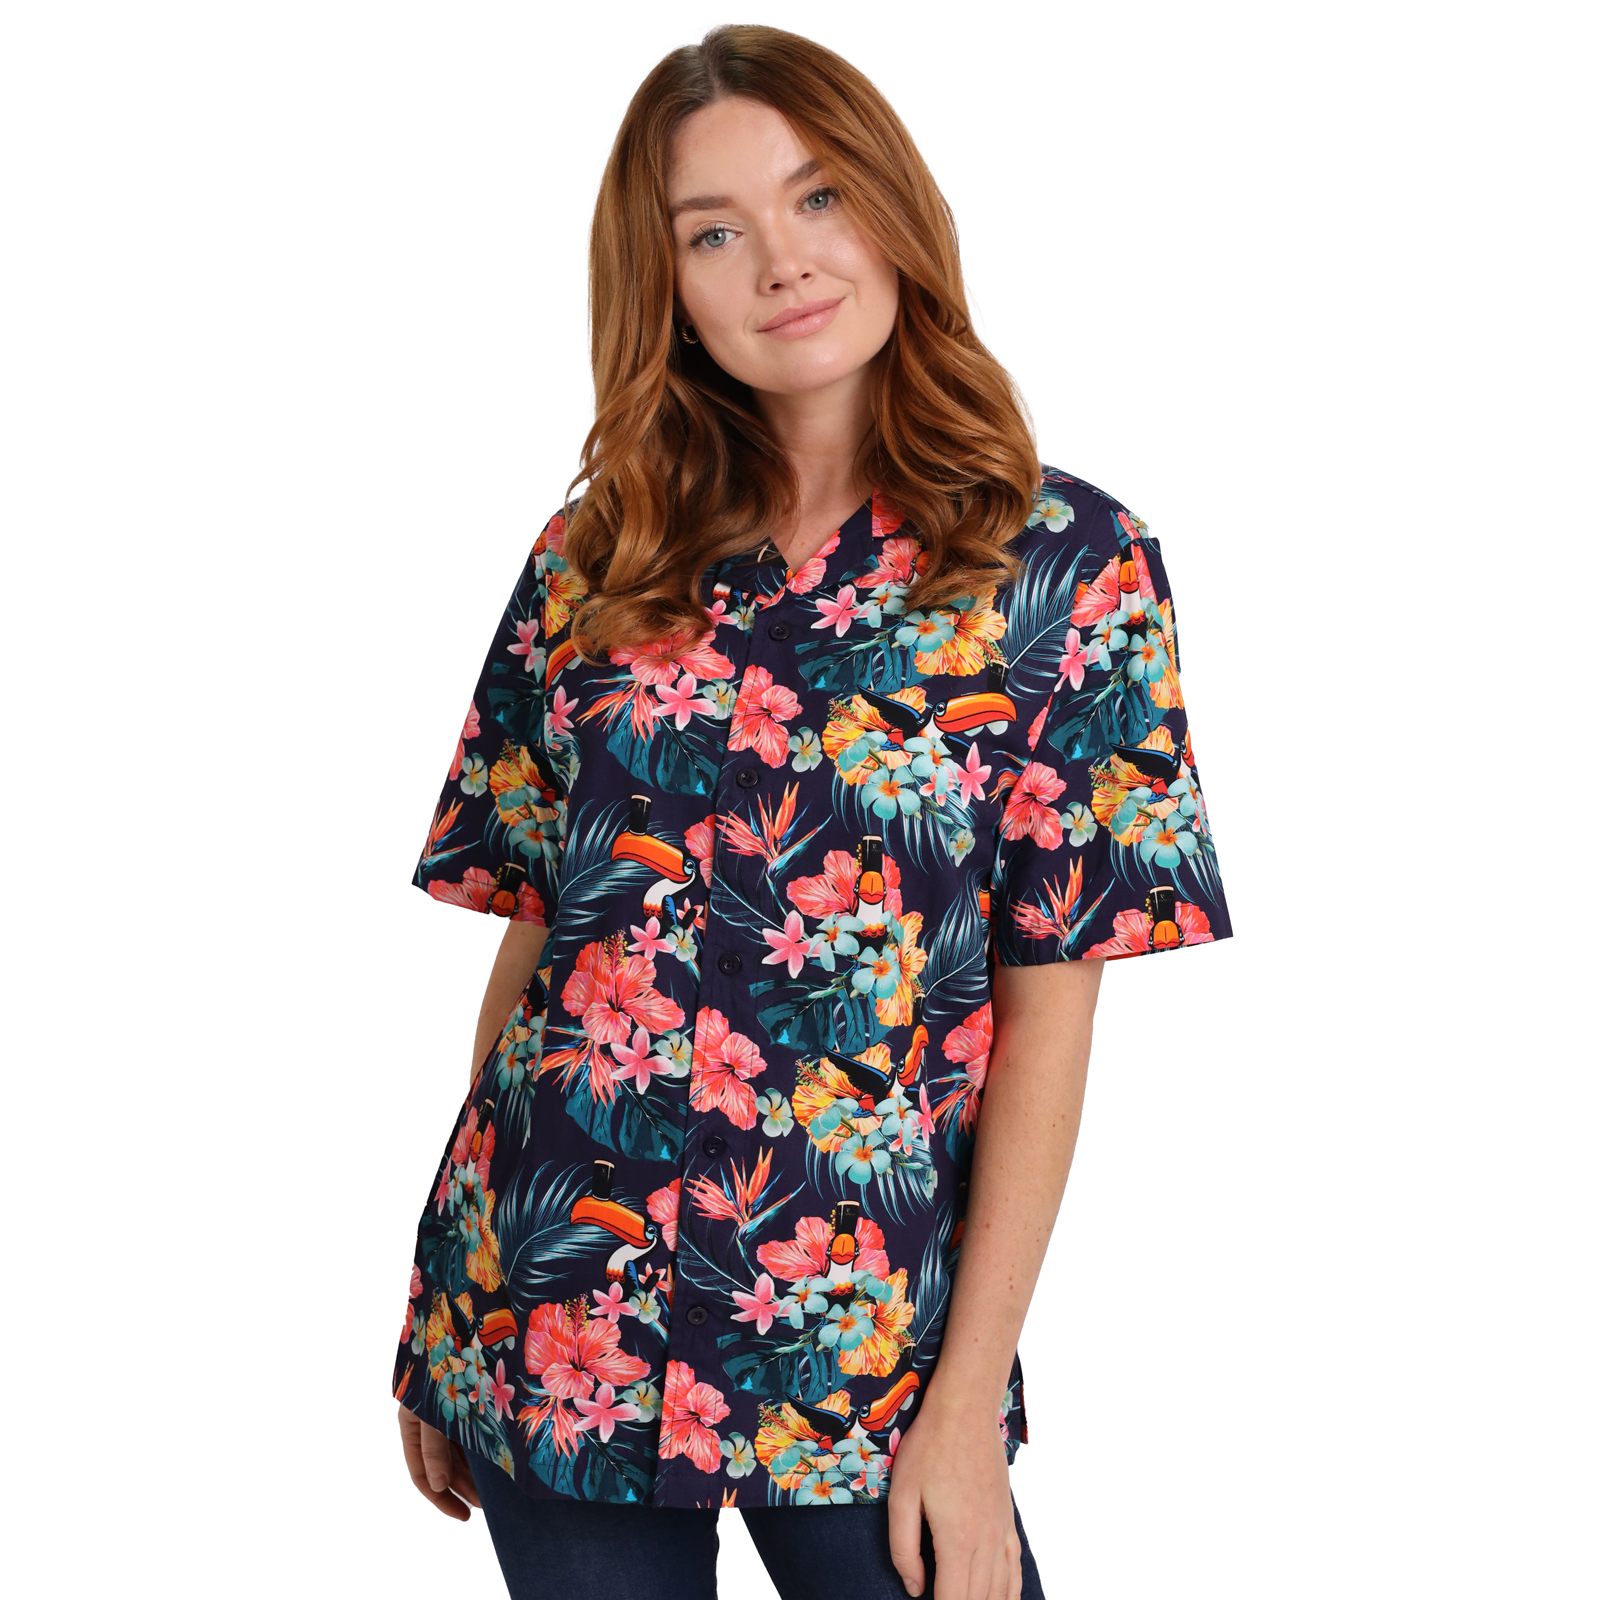 A person with long hair wearing a short-sleeve, button-up Guinness Toucan Hawaiian Shirt by Guinness, standing and smiling slightly. The vibrant shirt is made from 100% cotton.